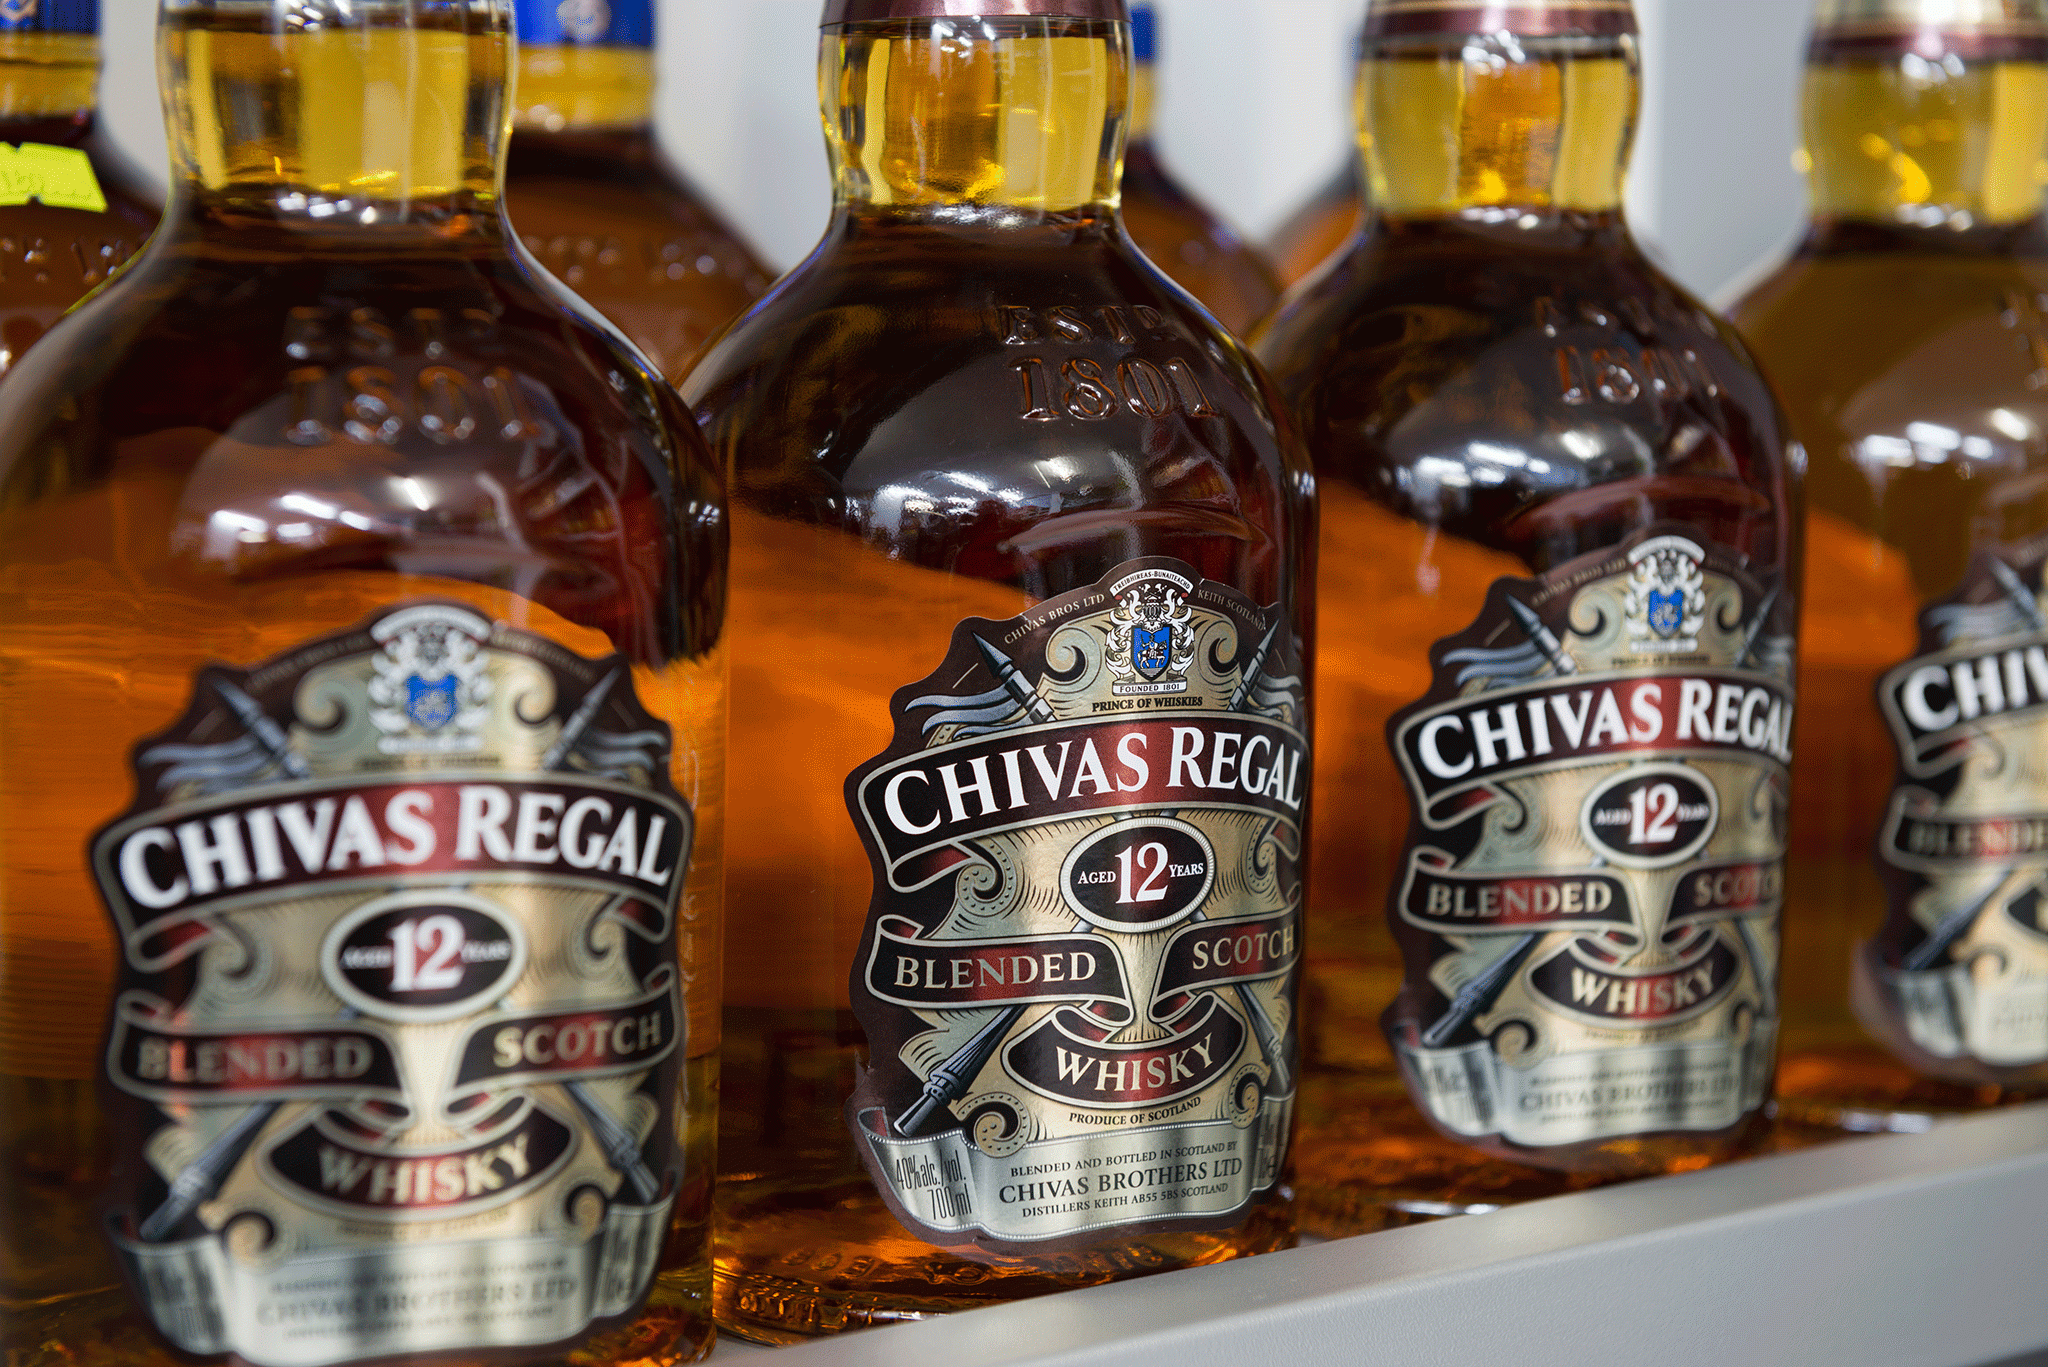 Drinks maker Pernod Ricard has suffered from declining sales of its upmarket drinks in Asia